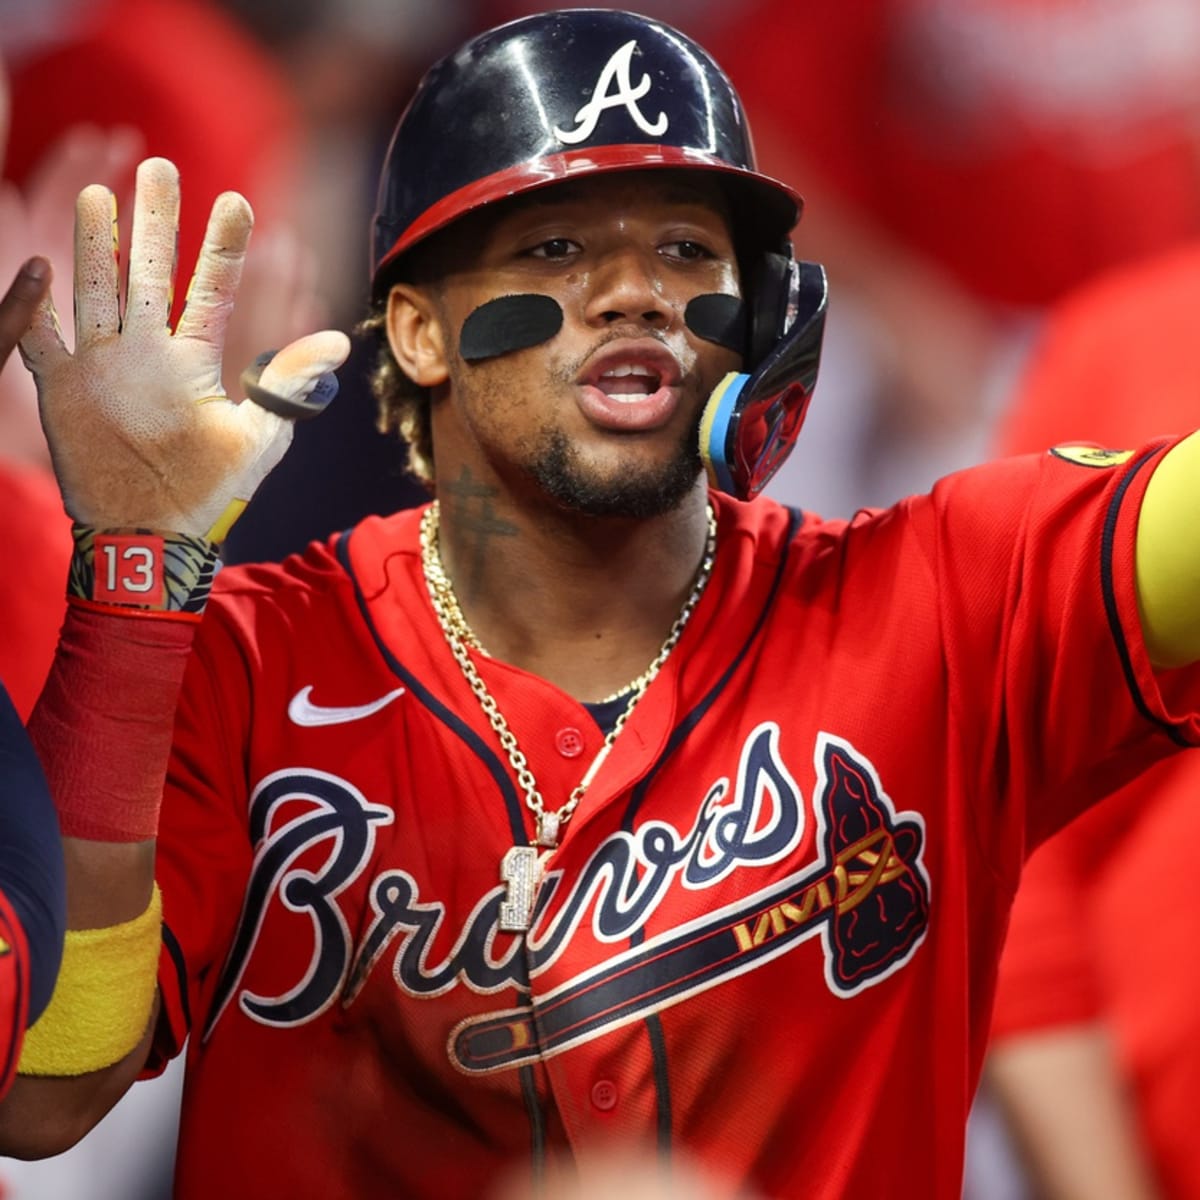 Atlanta Braves News: 2 Records Ronald Acuna Jr. Can Claim in Final Weekend